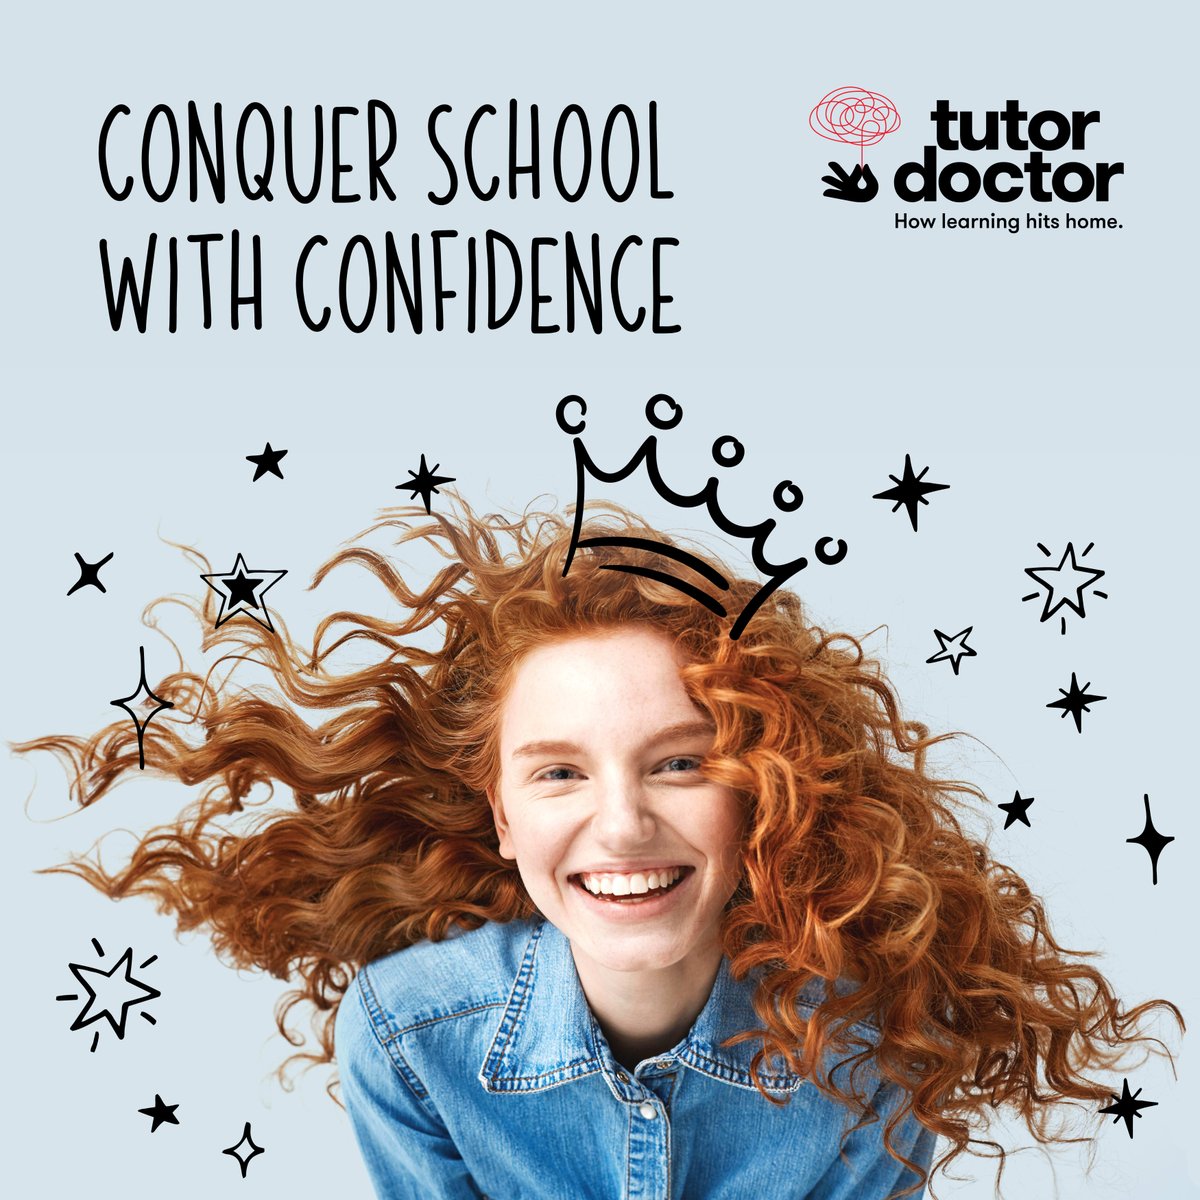 Unlock your true potential with Tutor Doctor! 🚀 Embrace learning, overcome challenges, and soar to new heights. Contact us today! 615-685-6070.  💡📚 #TutorDoctor #SuccessStories #EducationMatters #InHomeTutor #LikePostShare
#NewHights